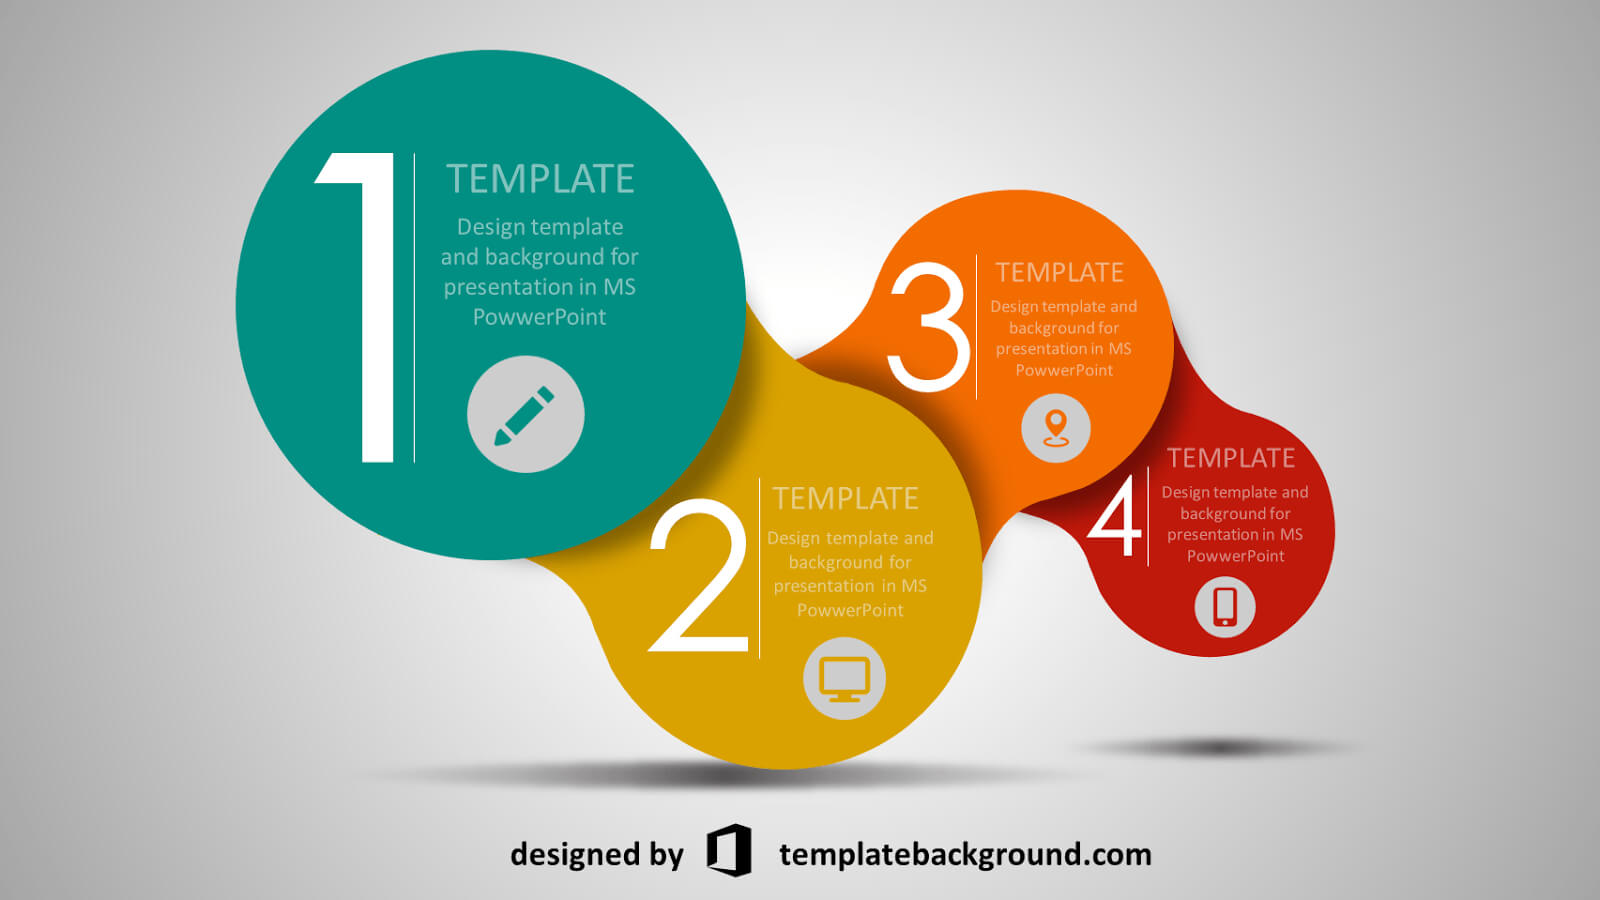 023 Template Ideas Animated Ppt Templates Free Shocking Within Powerpoint Animated Templates Free Download 2010